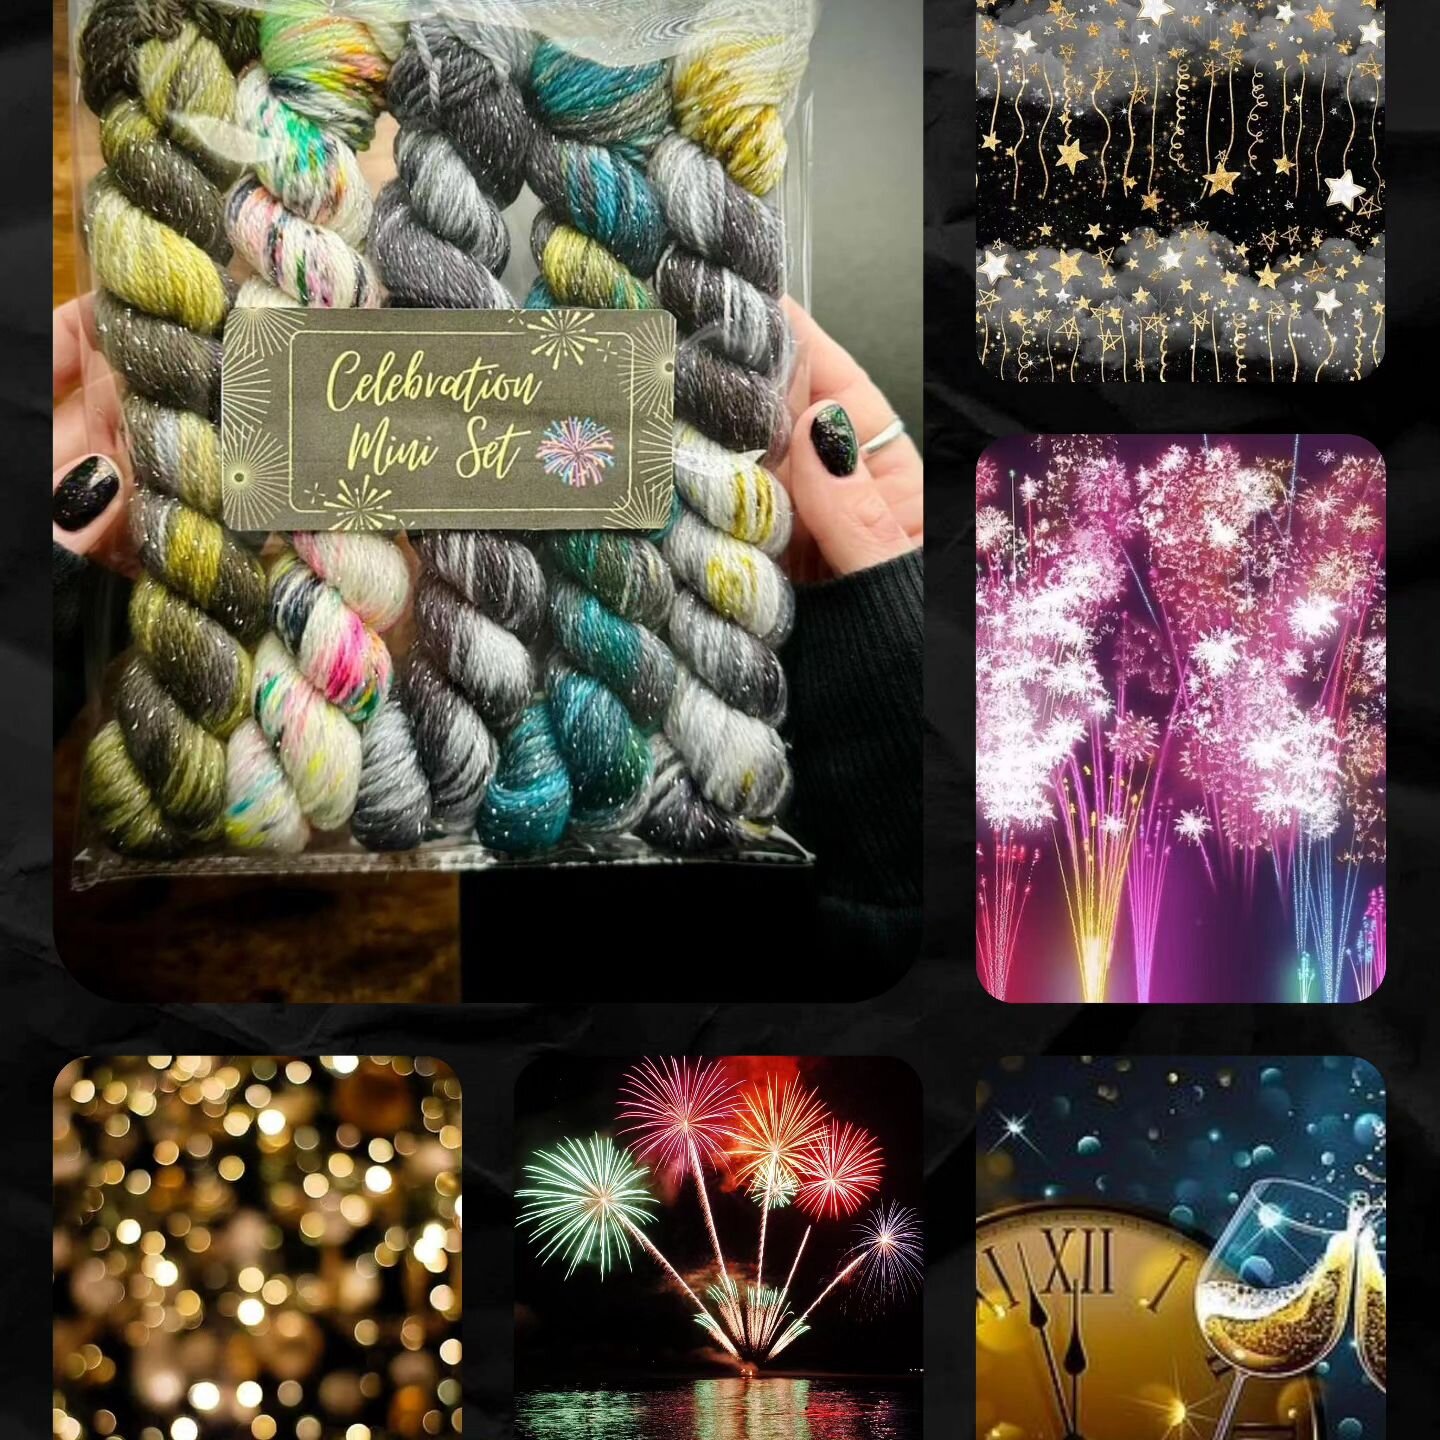 They are here!!! The Celebration DK Mini Skein Set from #rebelyarnco . Each mini skein is inspired by one of the pictures shown here. What a fabulous treat to start the New Year with....and the yarn is sparkly. So come by the shop. The sets are exclu